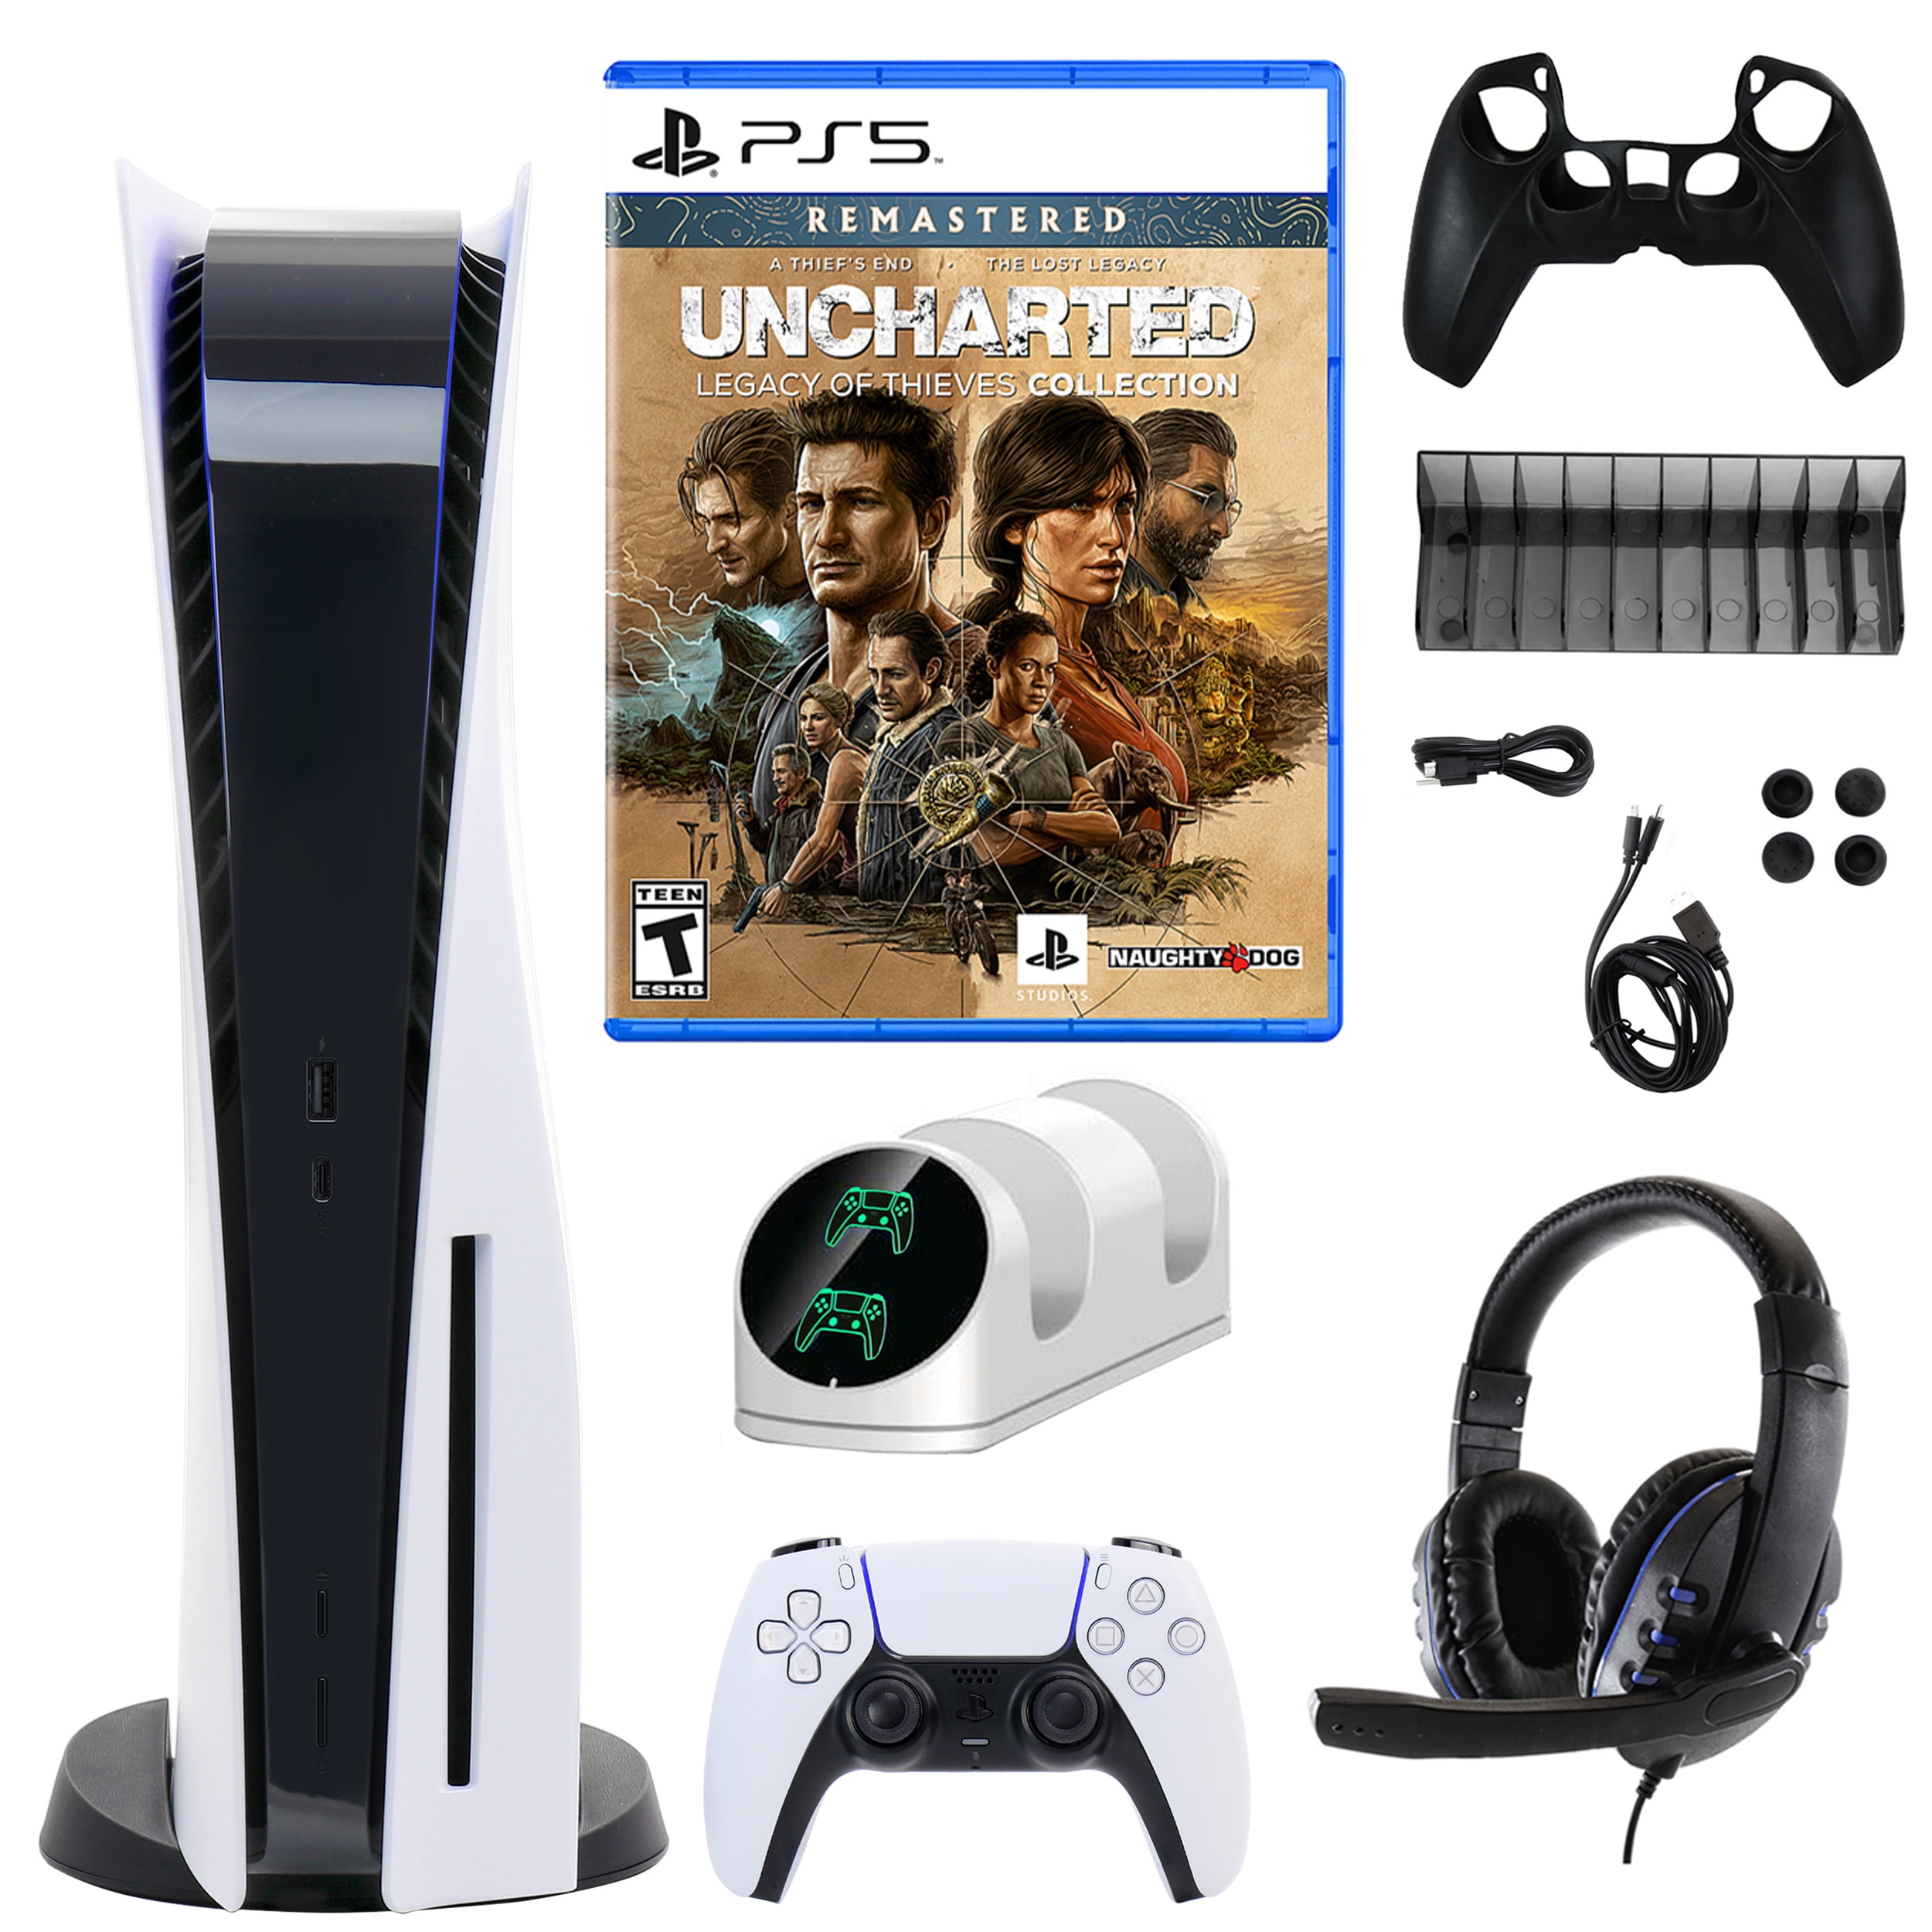 Sony PlayStation 5 Core Bundle with Uncharted Legacy and Accessories Kit